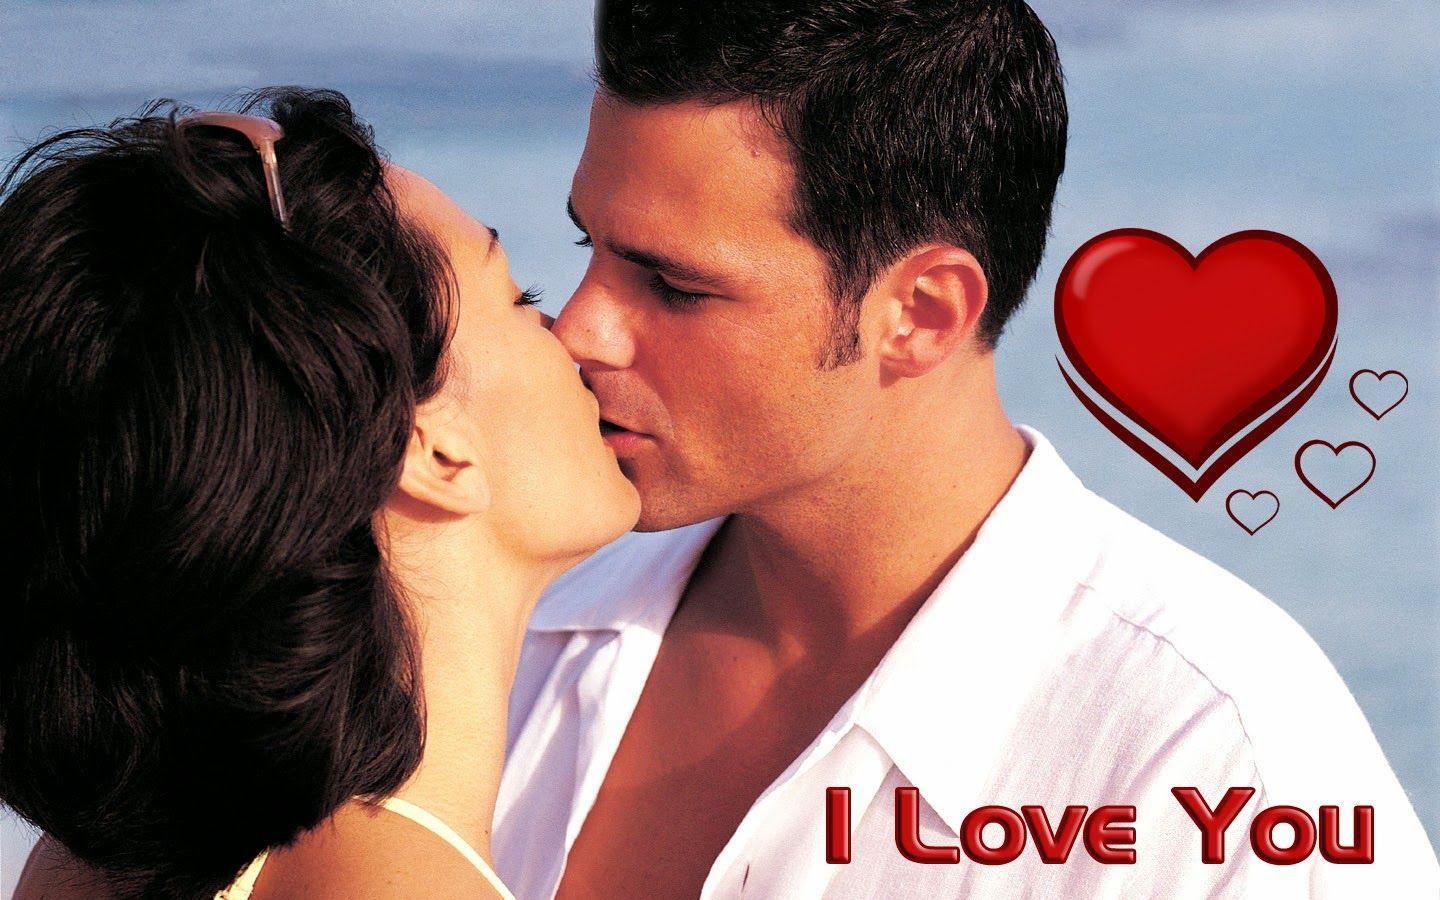 Happy Kiss Day Best HD Wallpaper Free Download. KISSING. Image